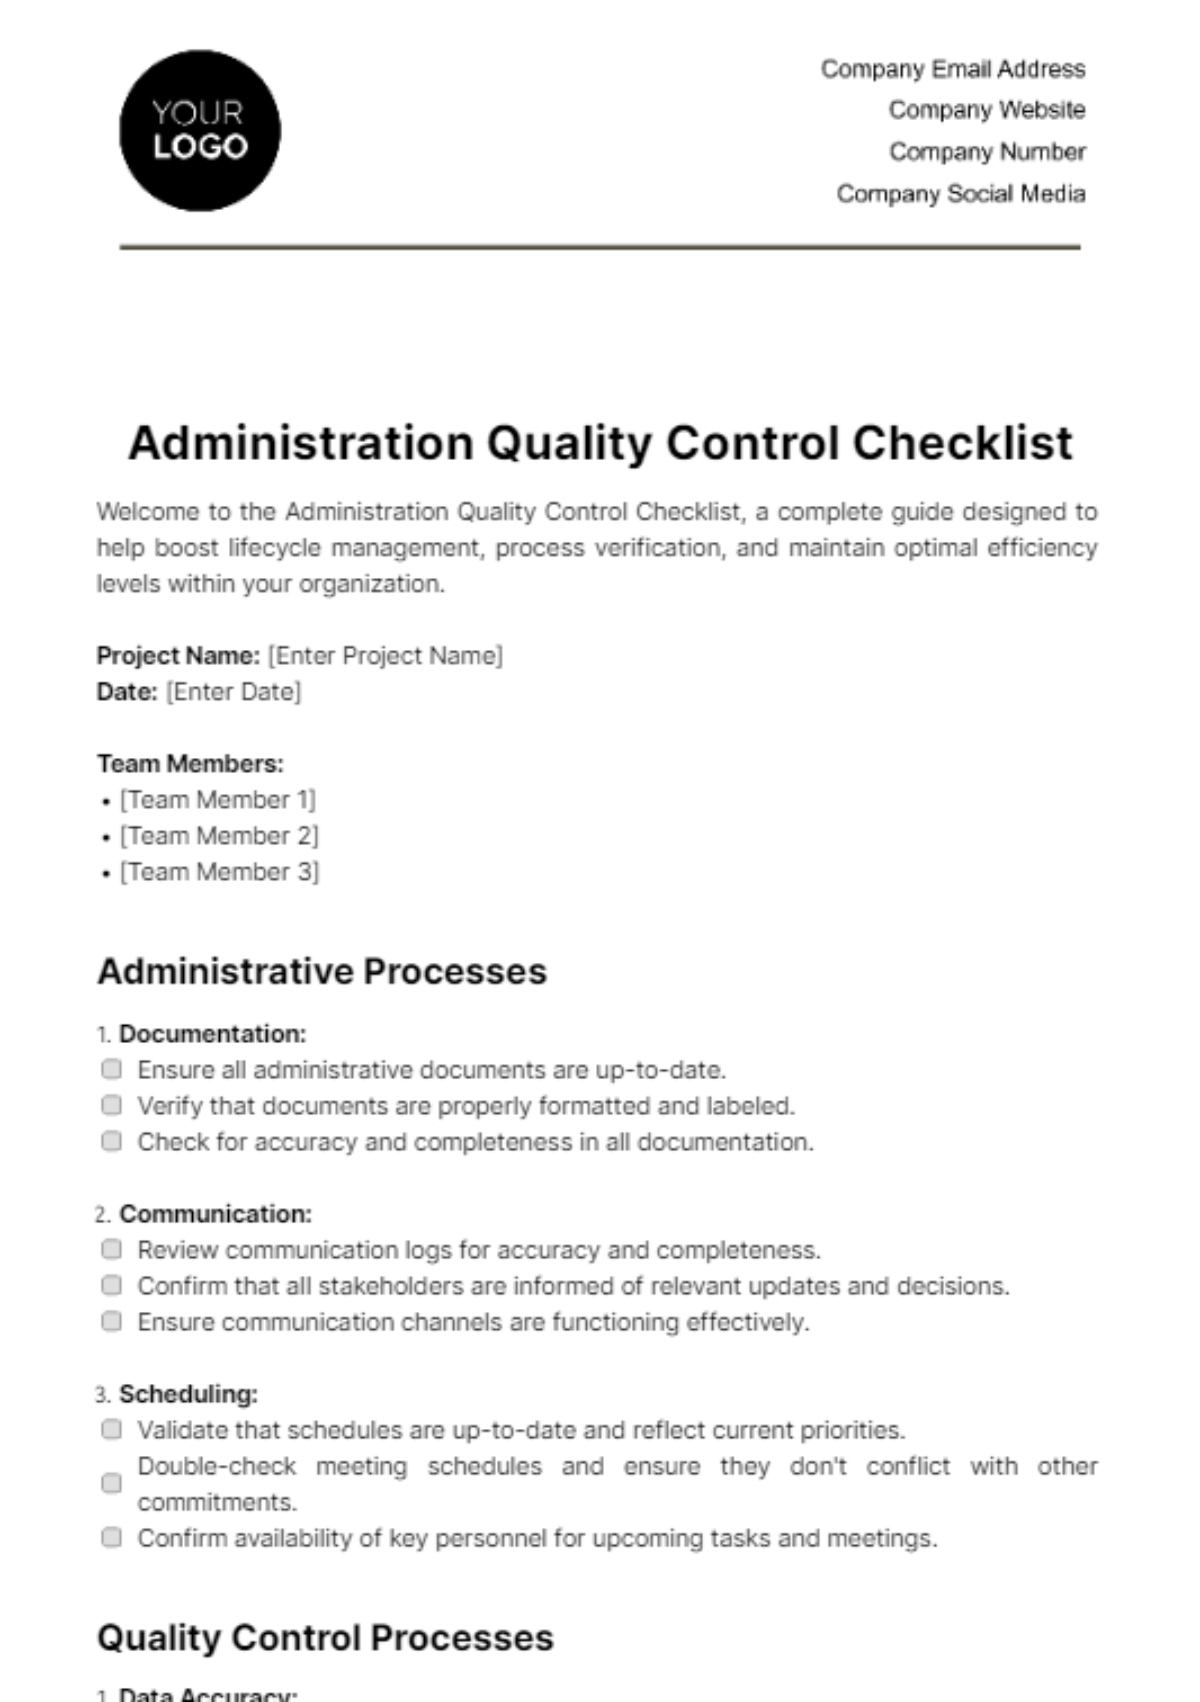 Administration Quality Control Checklist Template